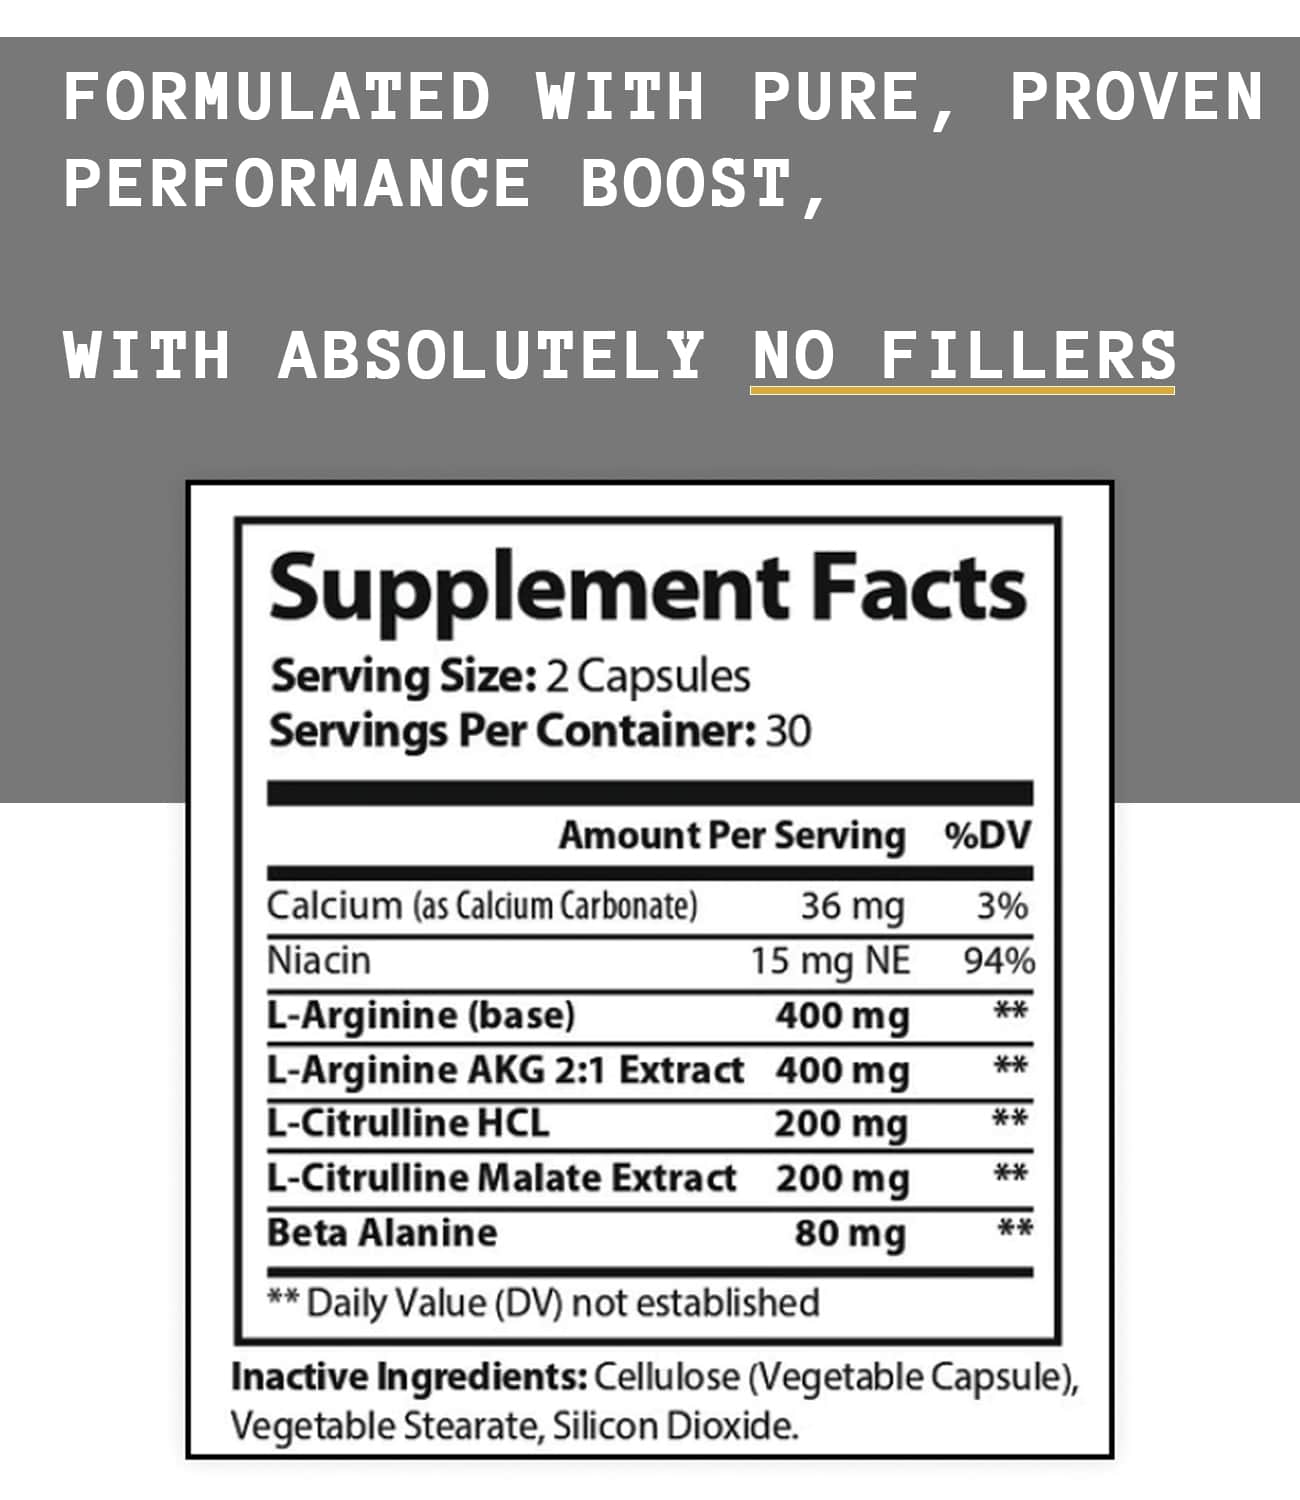 Facts and Ingredients included in arginine tablets